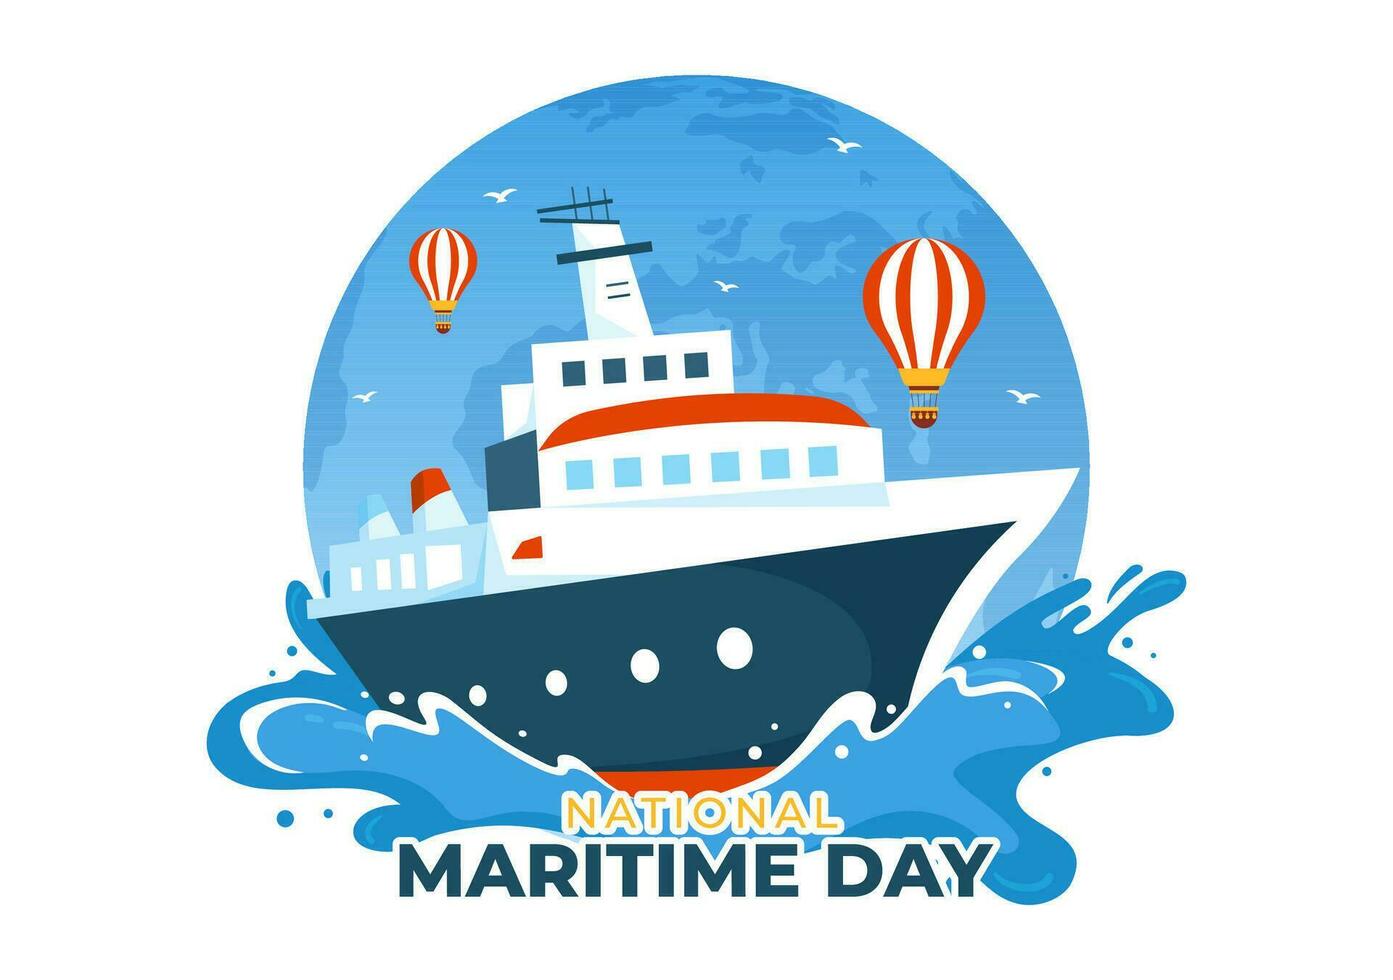 World Maritime Day Vector Illustration with Sea and Ship for Shipping Safety and Security and the Marine Environment in Nautical Celebration Design